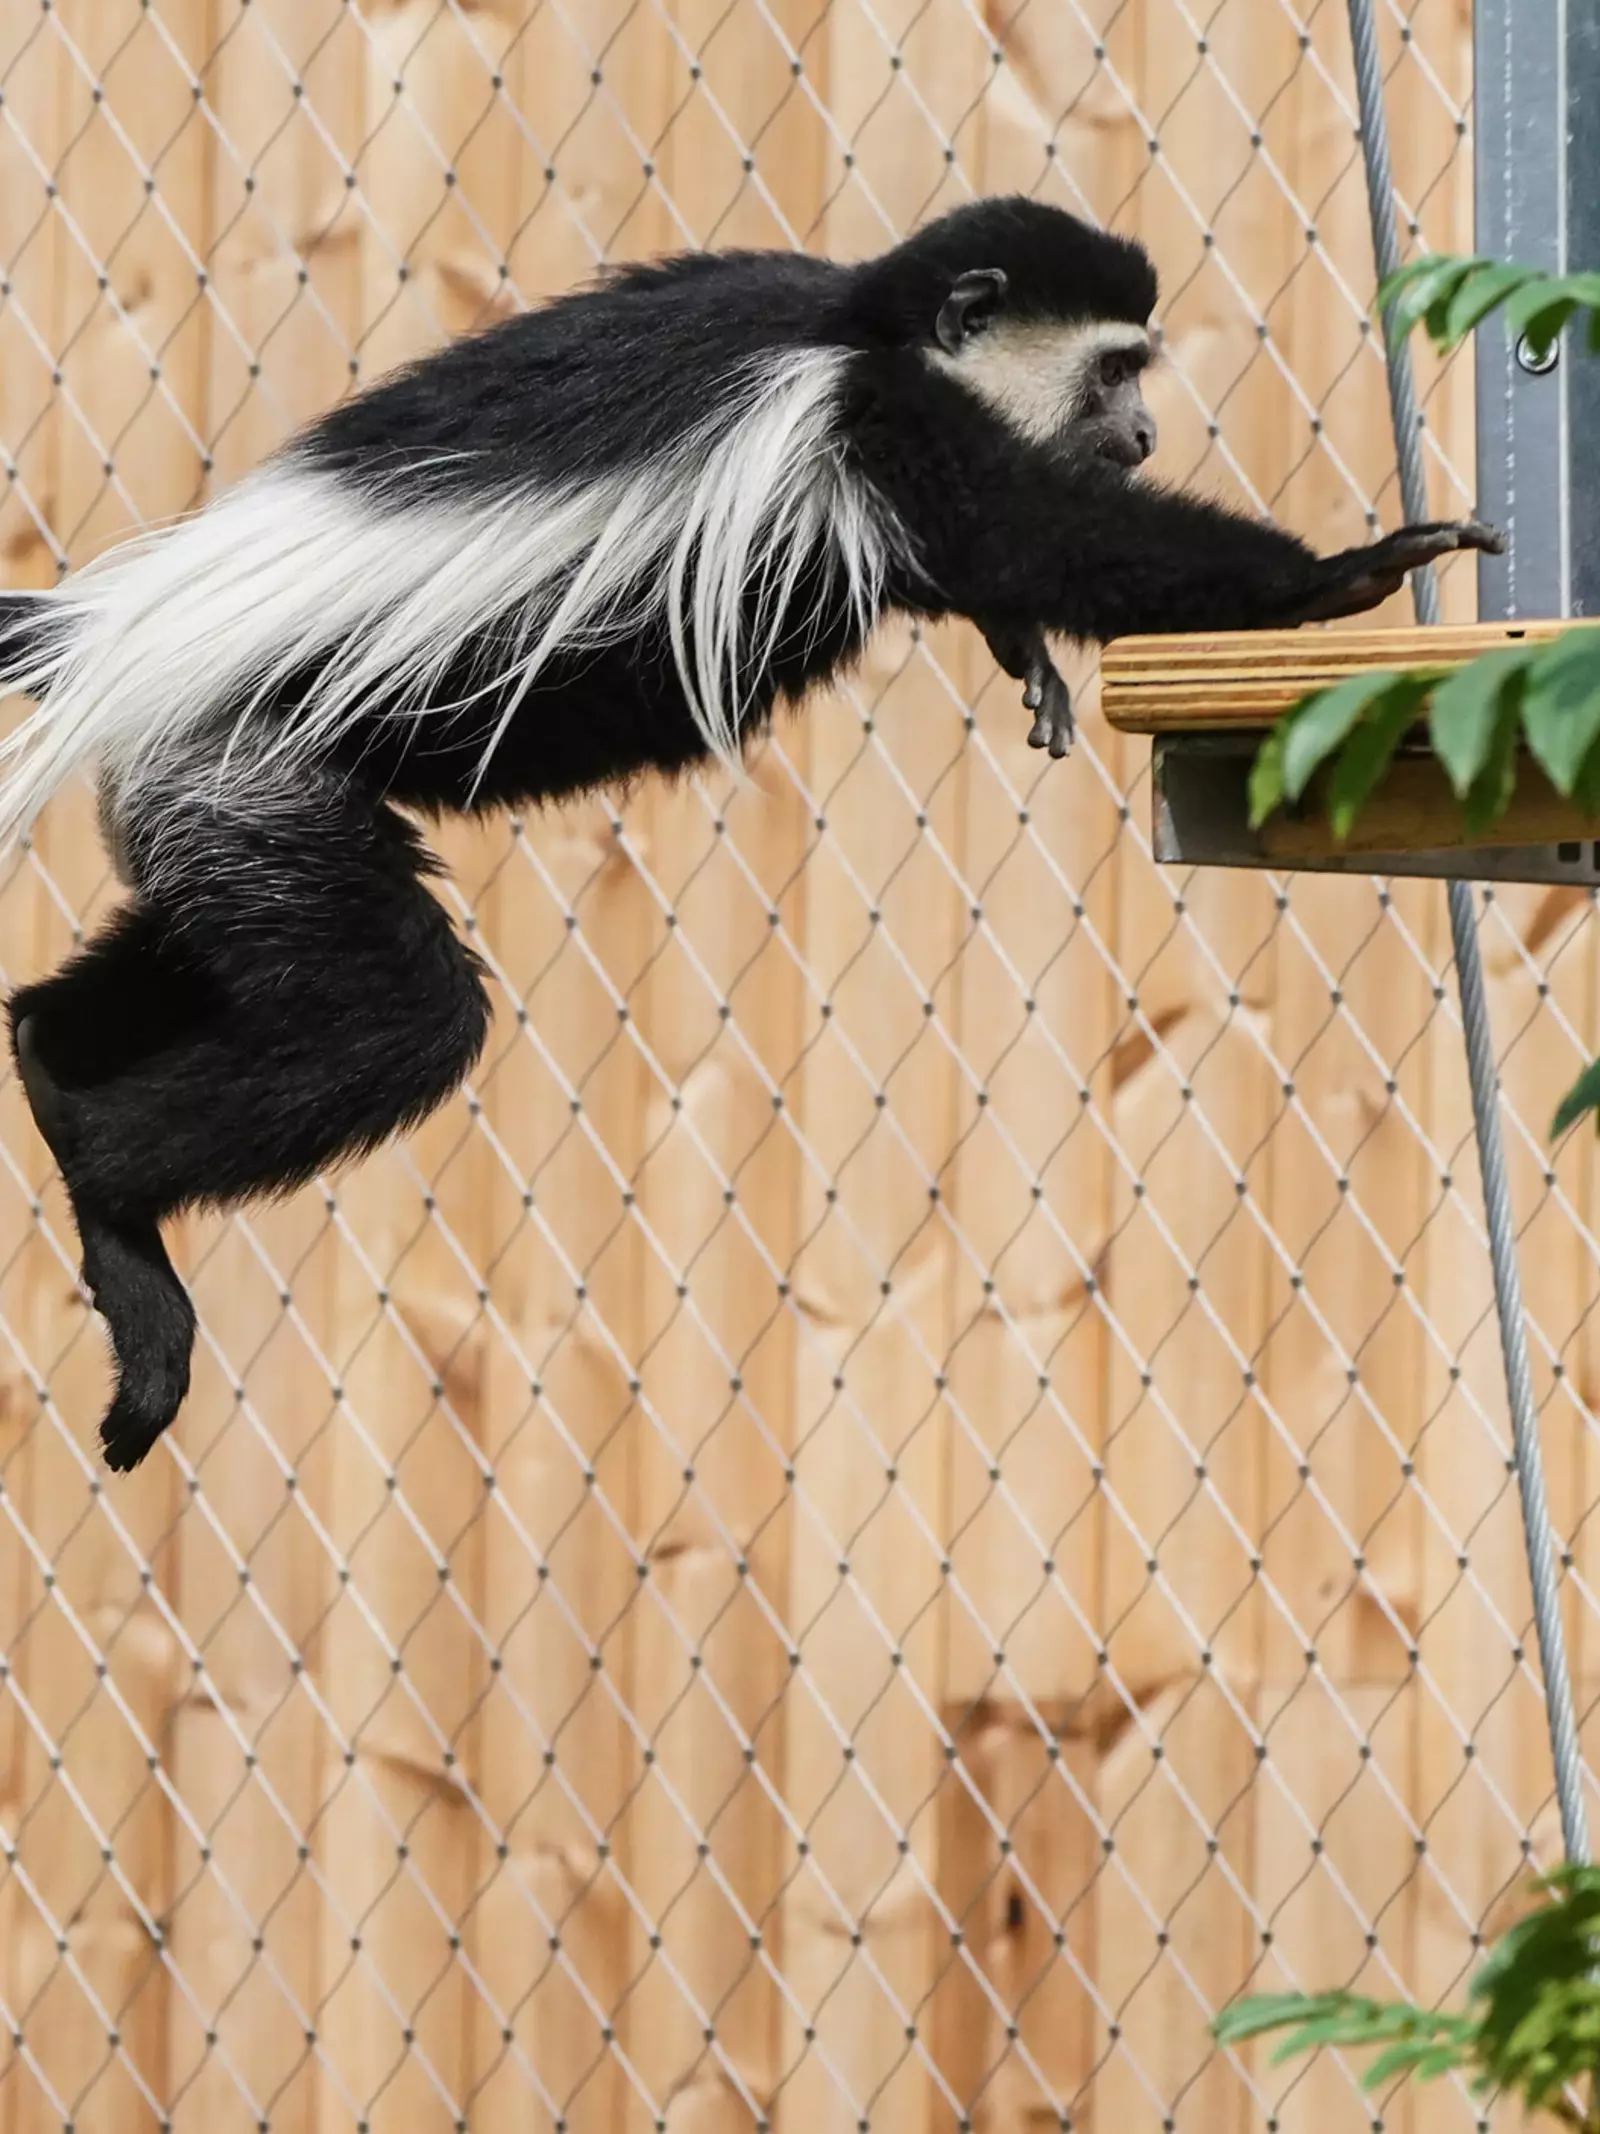 Colobus monkey leaping in Monkey Valley